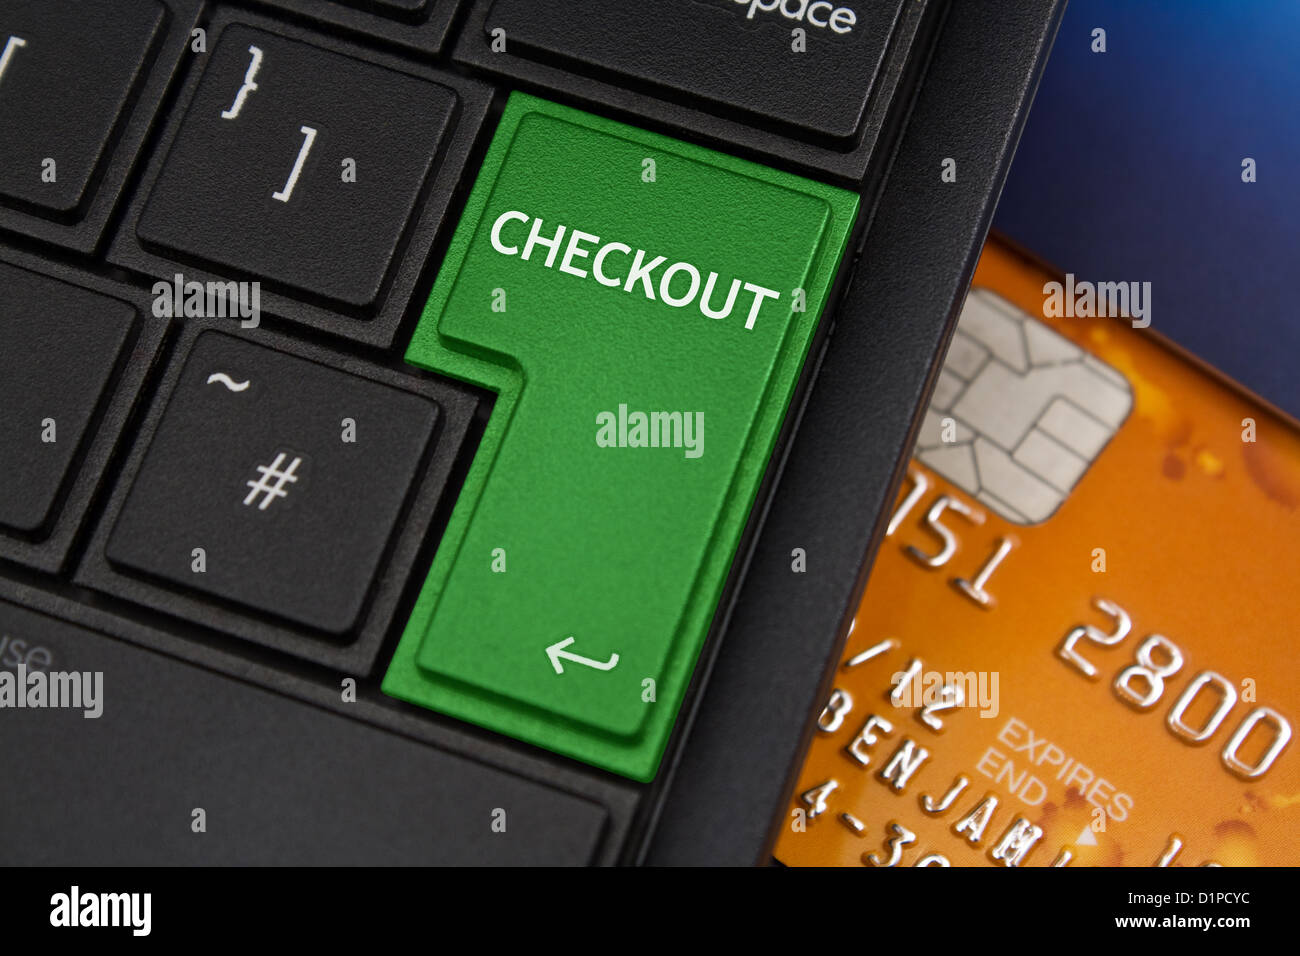 Checkout Enter Key on a modern laptop qwerty keyboard with bank smart card underneath to represent online shopping Stock Photo